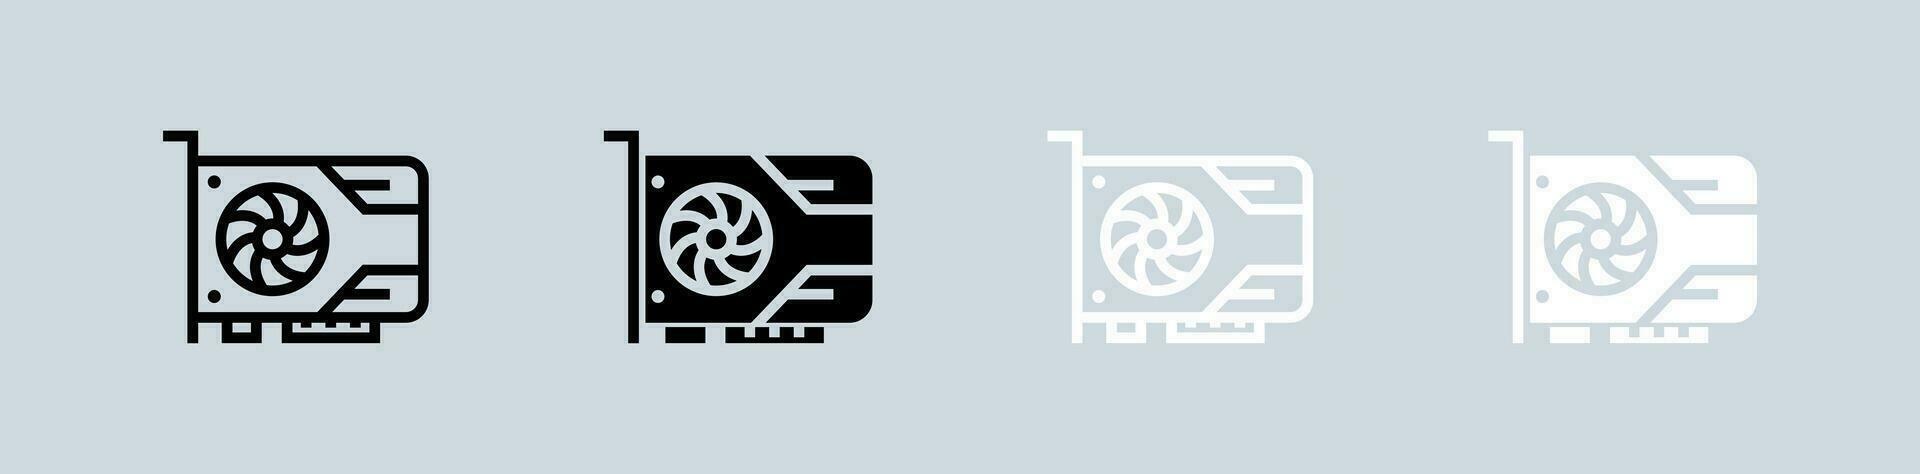 Video card icon set in black and white. Gpu signs vector illustration.